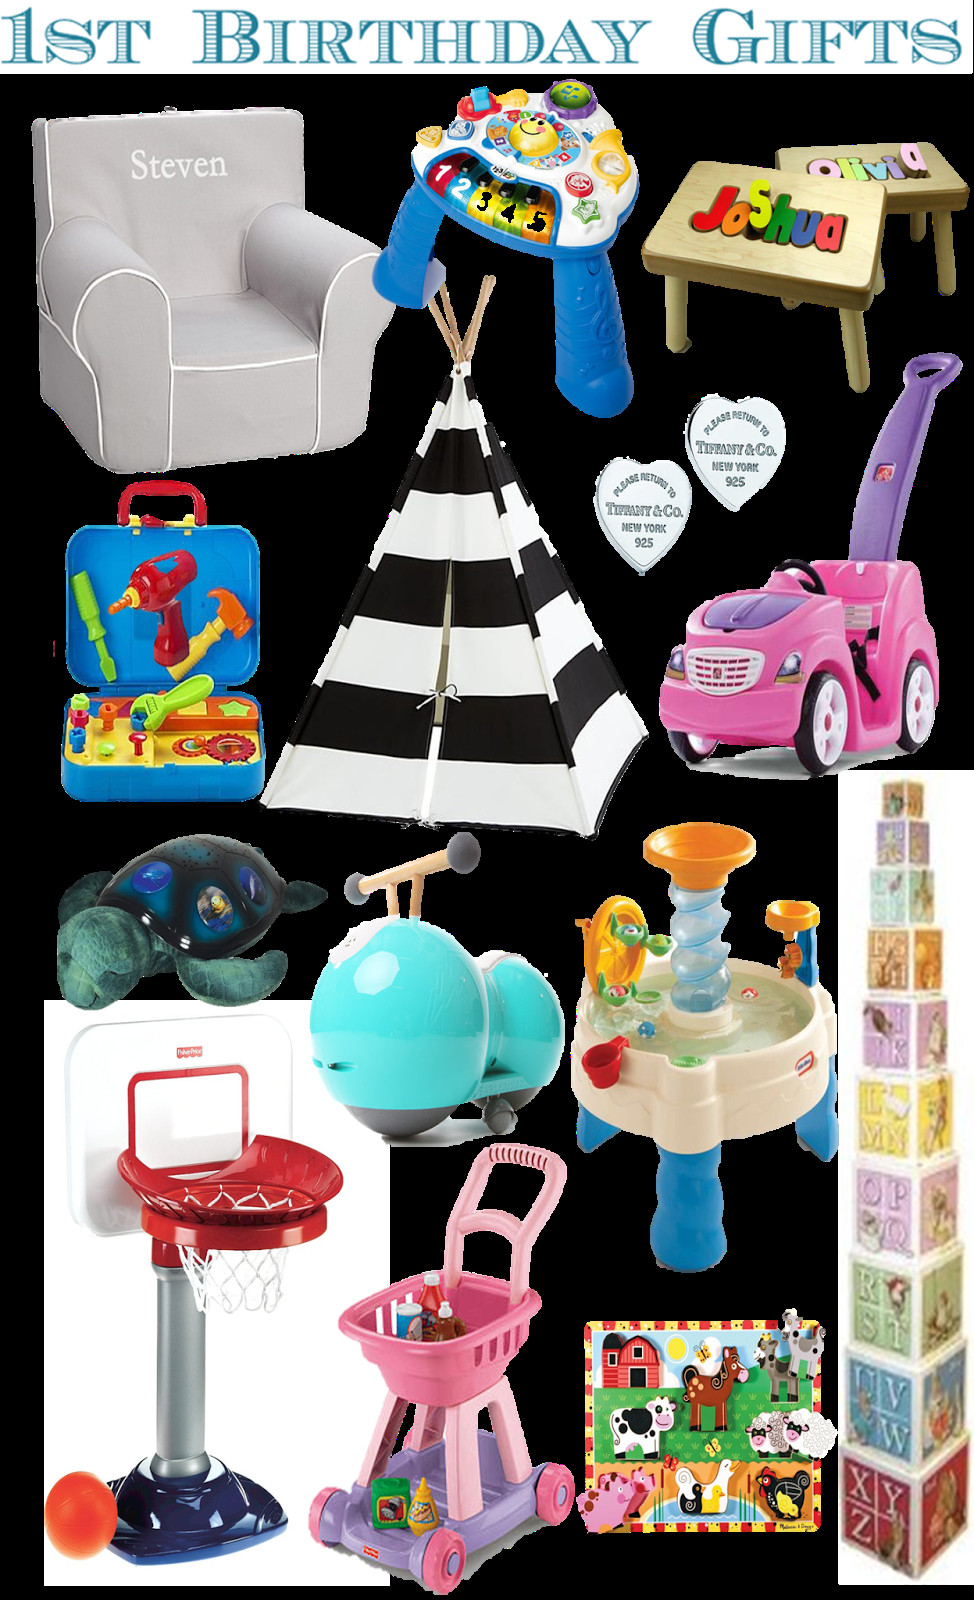 1 Year Baby Gift Ideas
 rnlMusings Gift Guide 1st Birthday Gifts